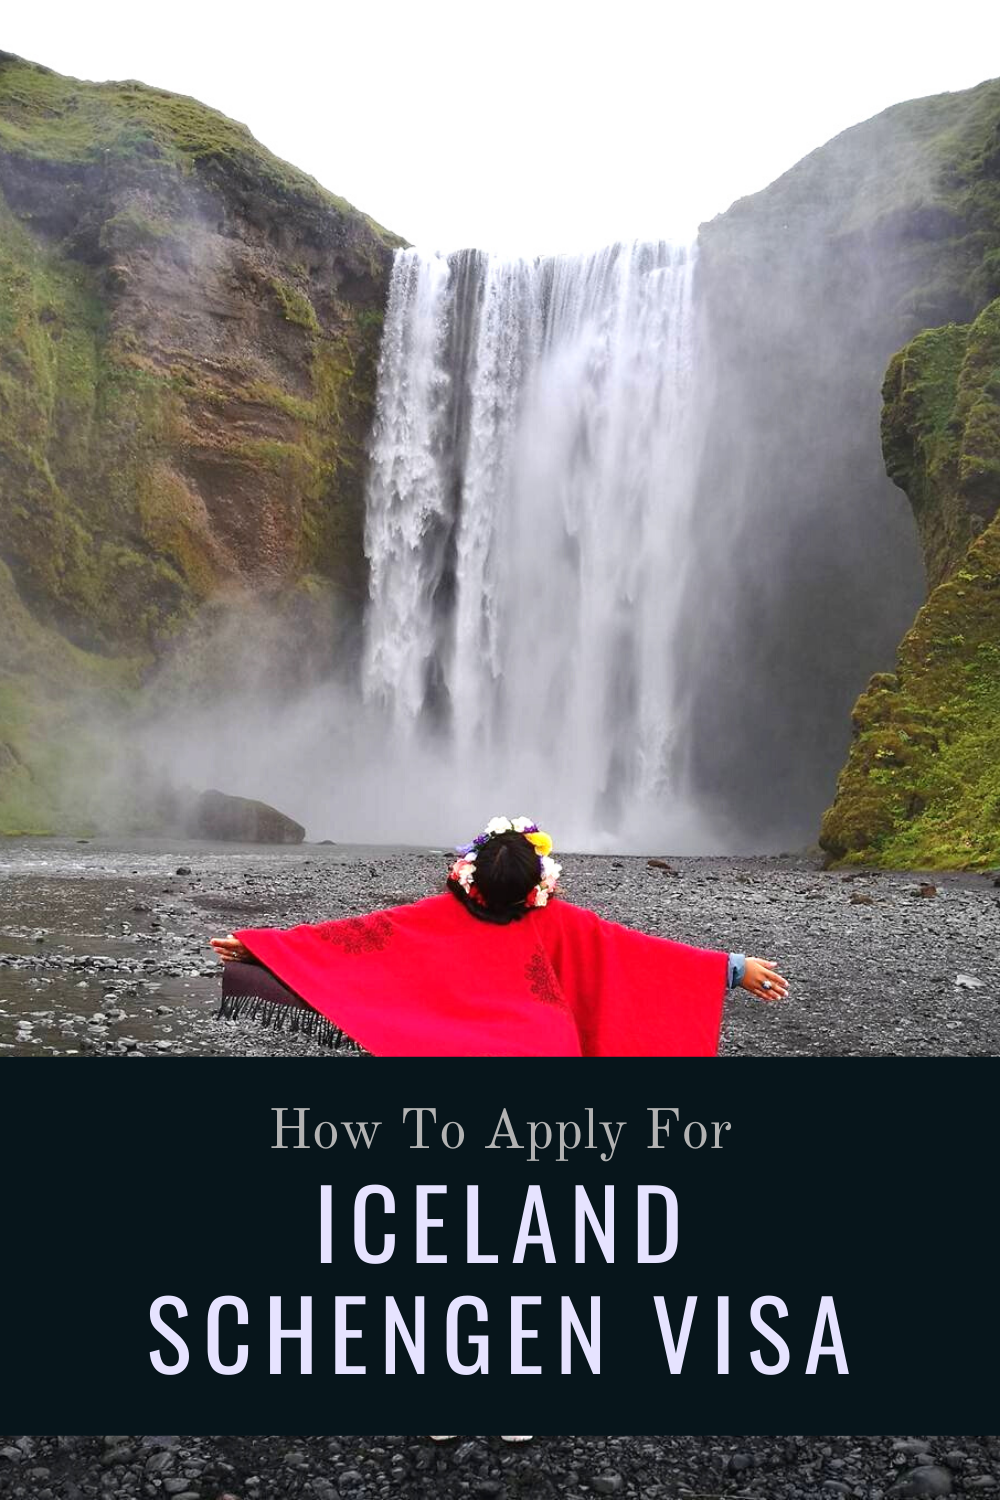 How To Apply For Iceland Schengen Visa For Philippine Passport Holders.png